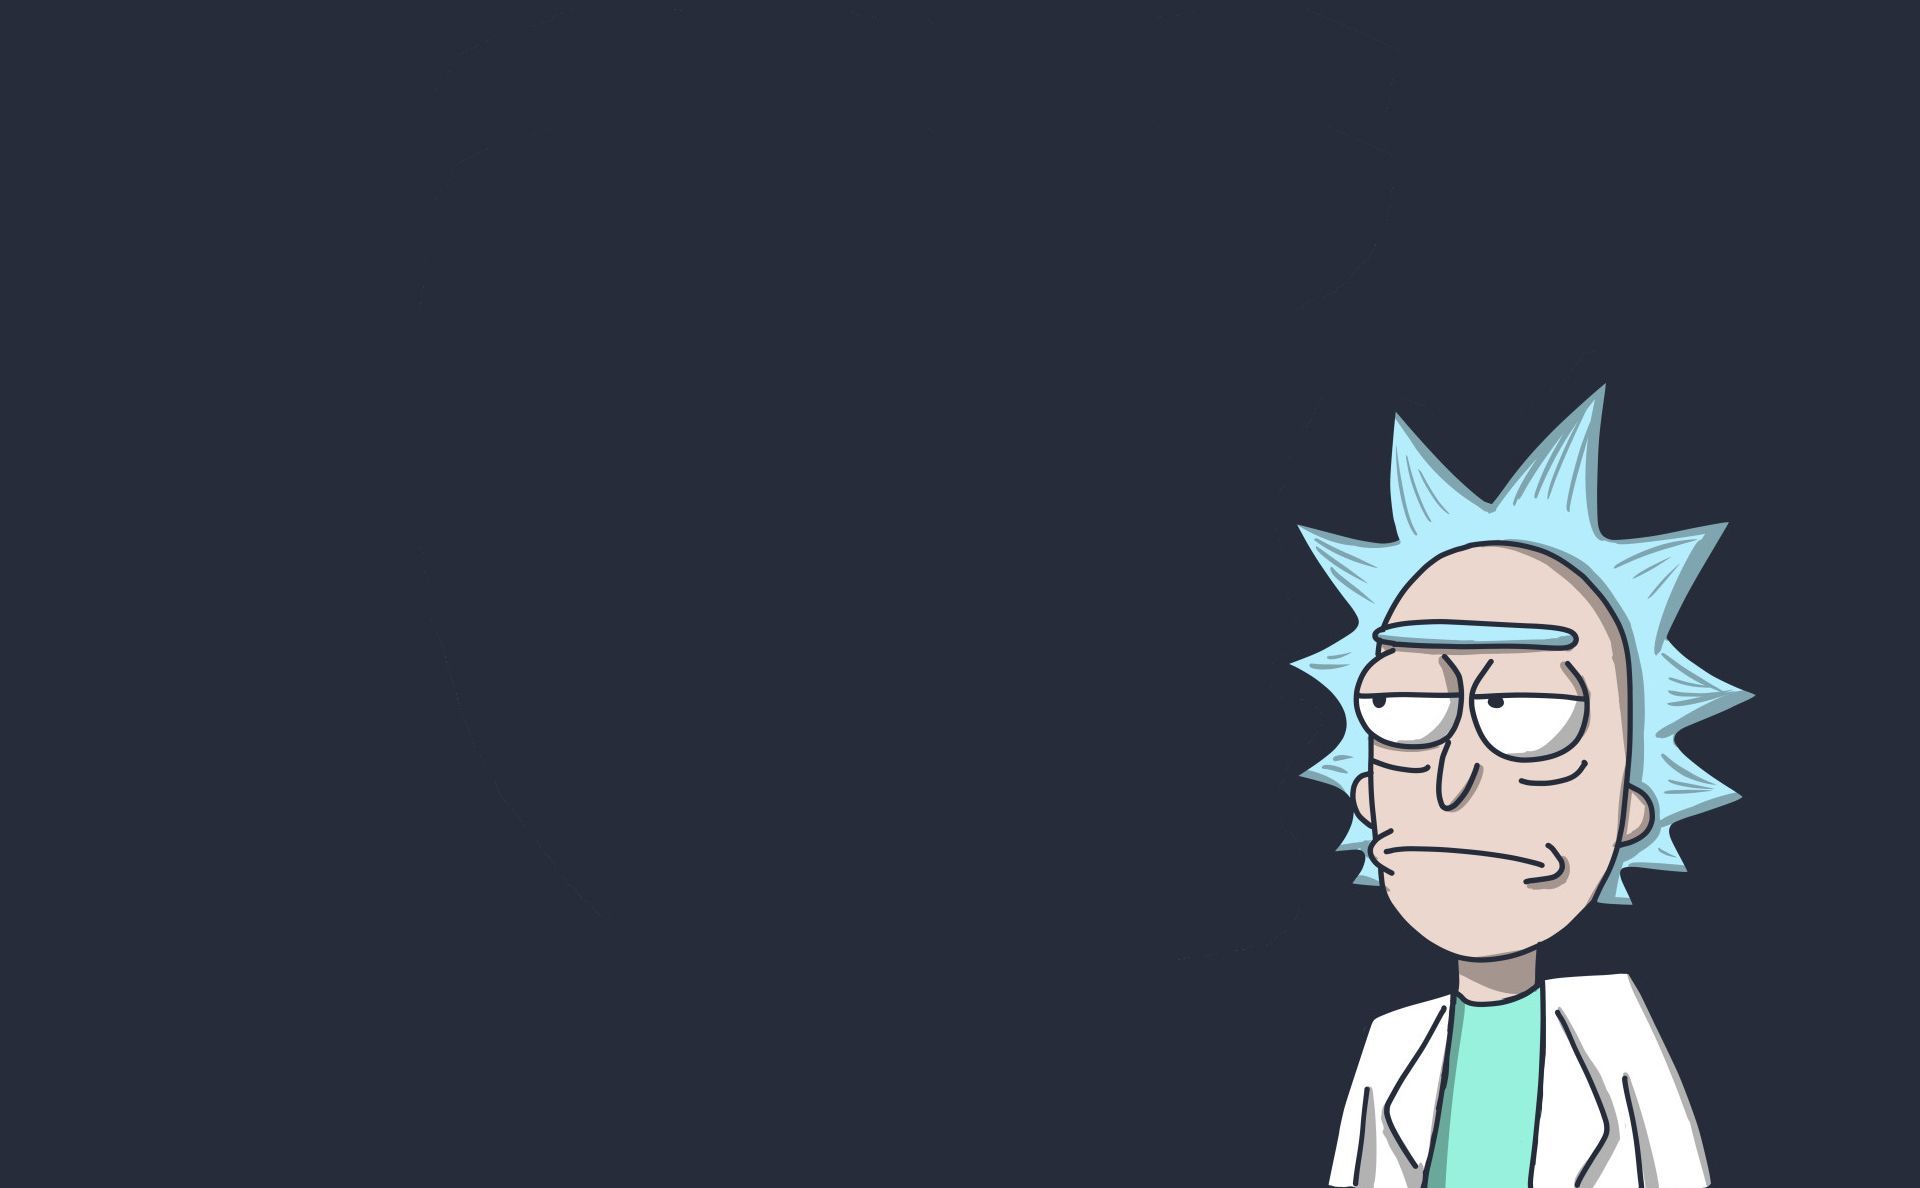 Wallpaper for laptop Rick And Morty. Computer wallpaper desktop wallpaper, Cartoon wallpaper, Laptop wallpaper